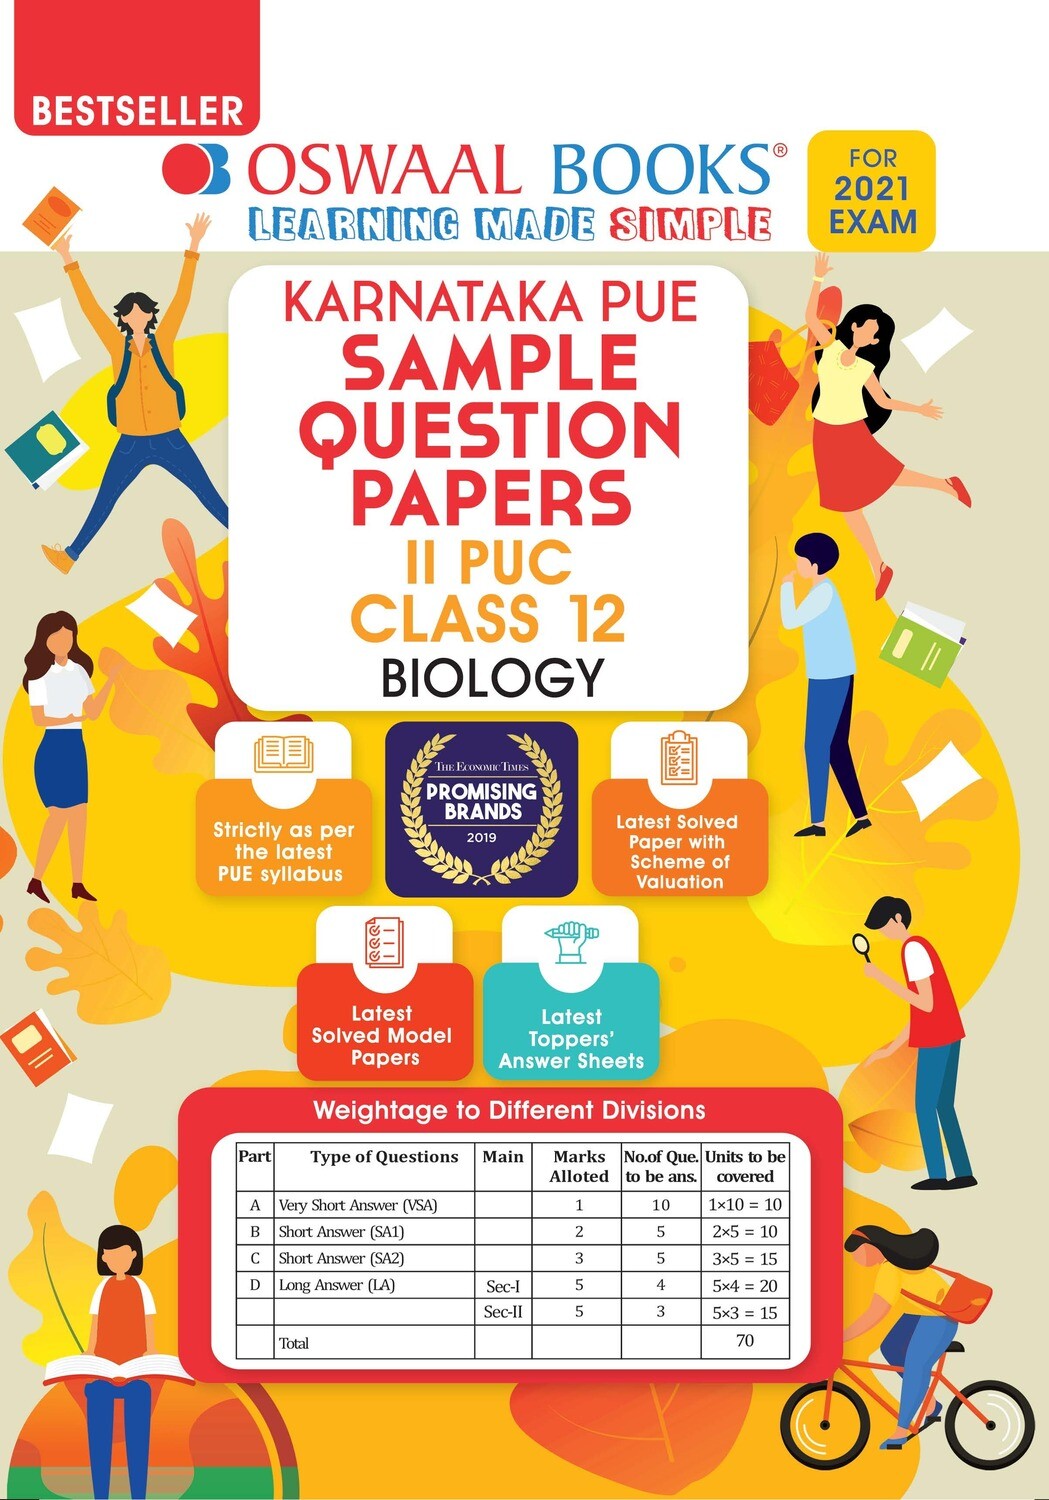 Buy e-book: Oswaal Karnataka PUE Sample Question Papers II PUC Class 12 Biology (For 2021 Exam): 9789390411511